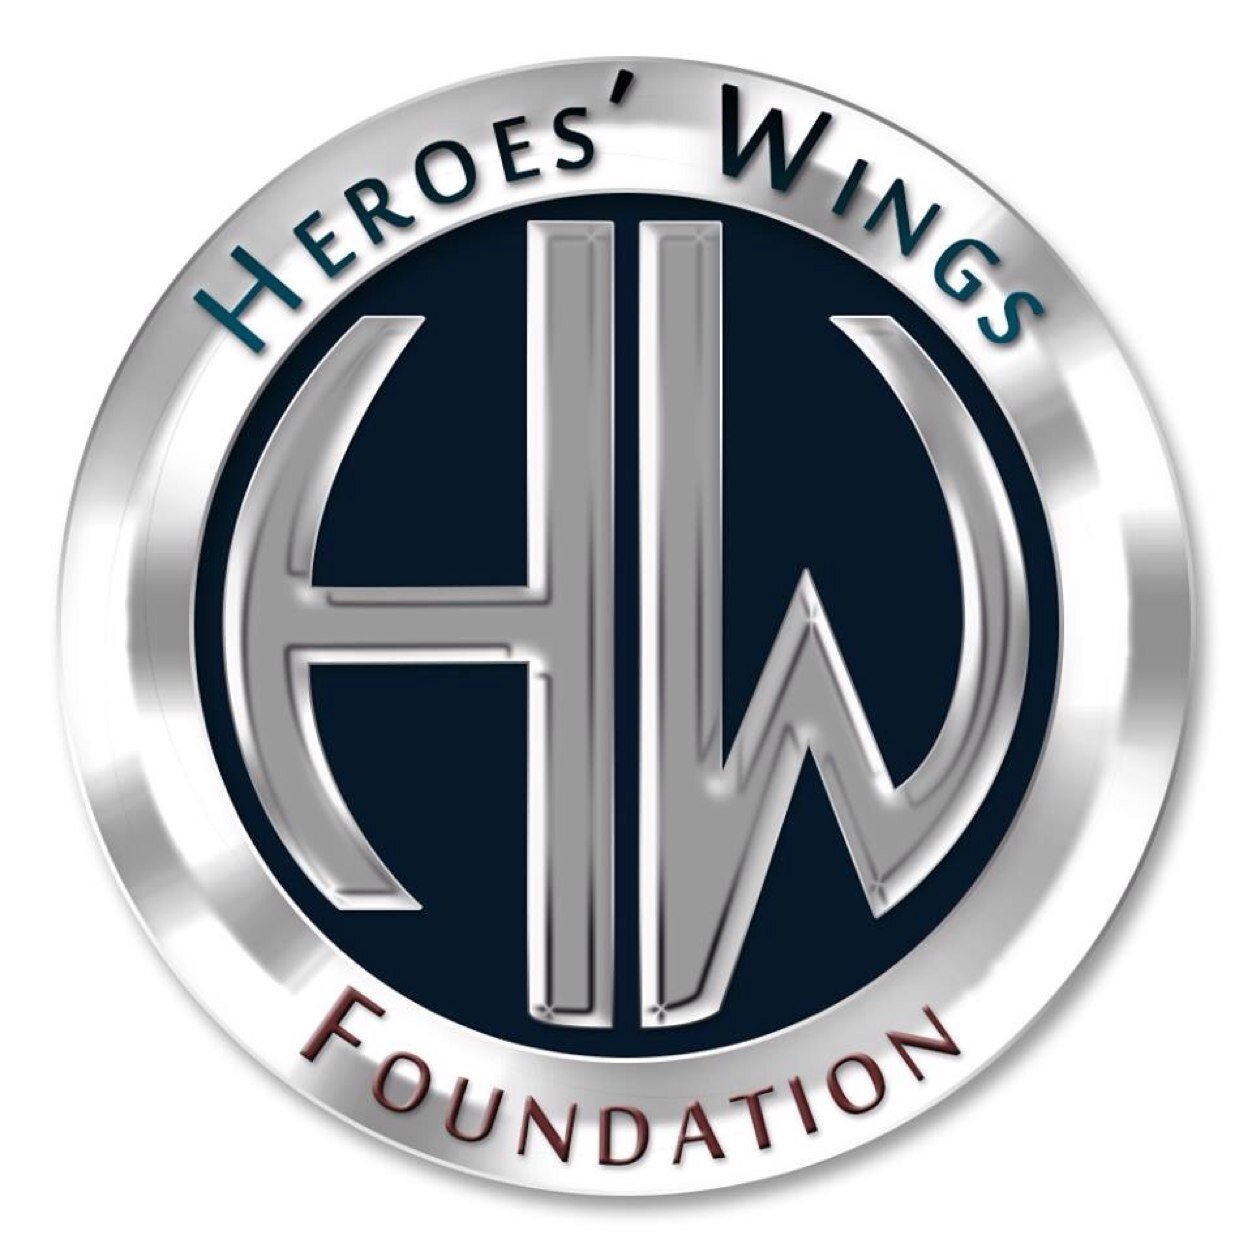 The Heroes' Wings Foundation is dedicated to providing free air transportation services to our Heroes in need.